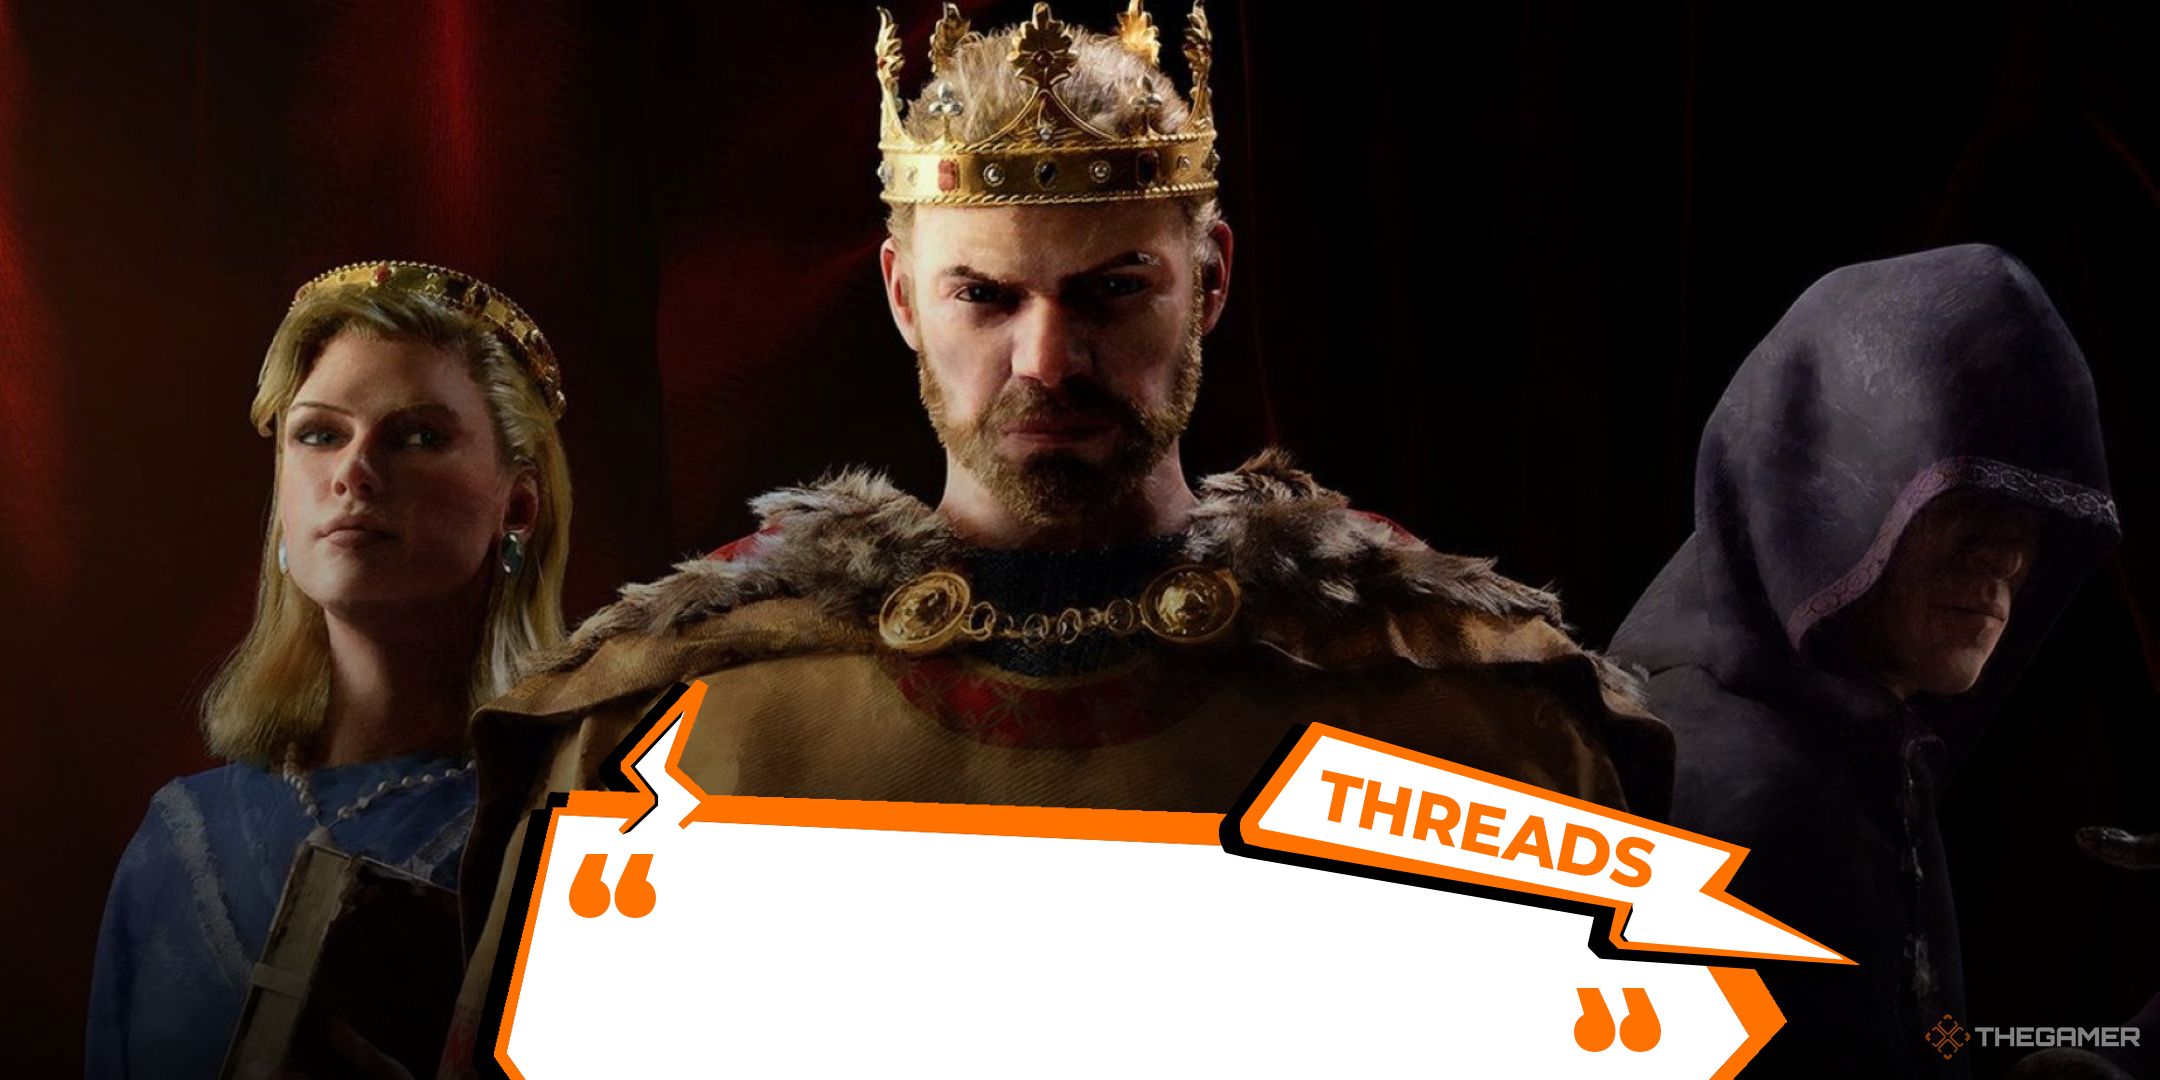 the king, queen, and schemer from the key image of crusader kings 3 with thegamer's threads logo superimposed